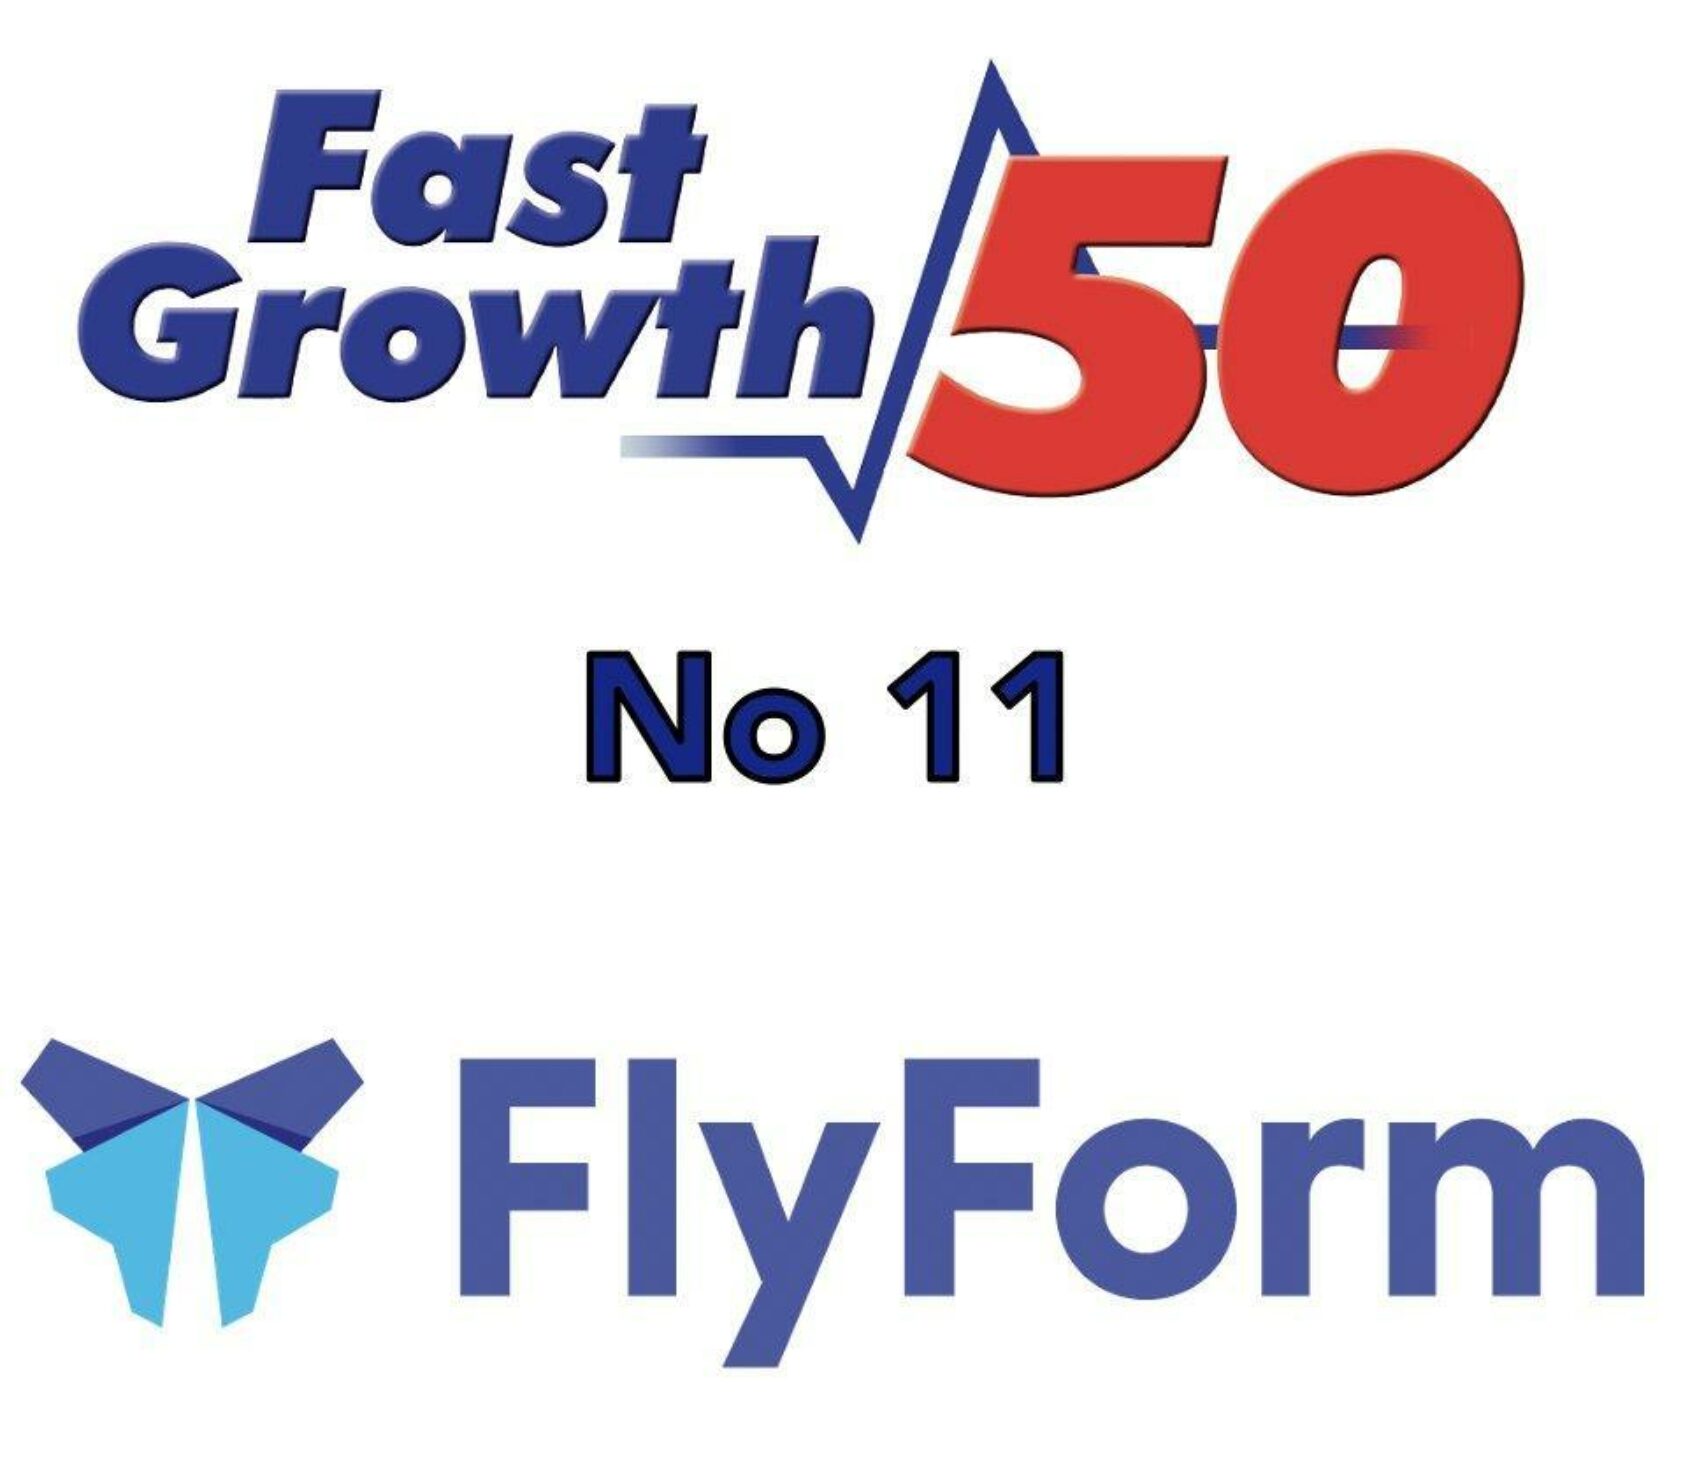 Graphic showing Fast Growth 50 logo